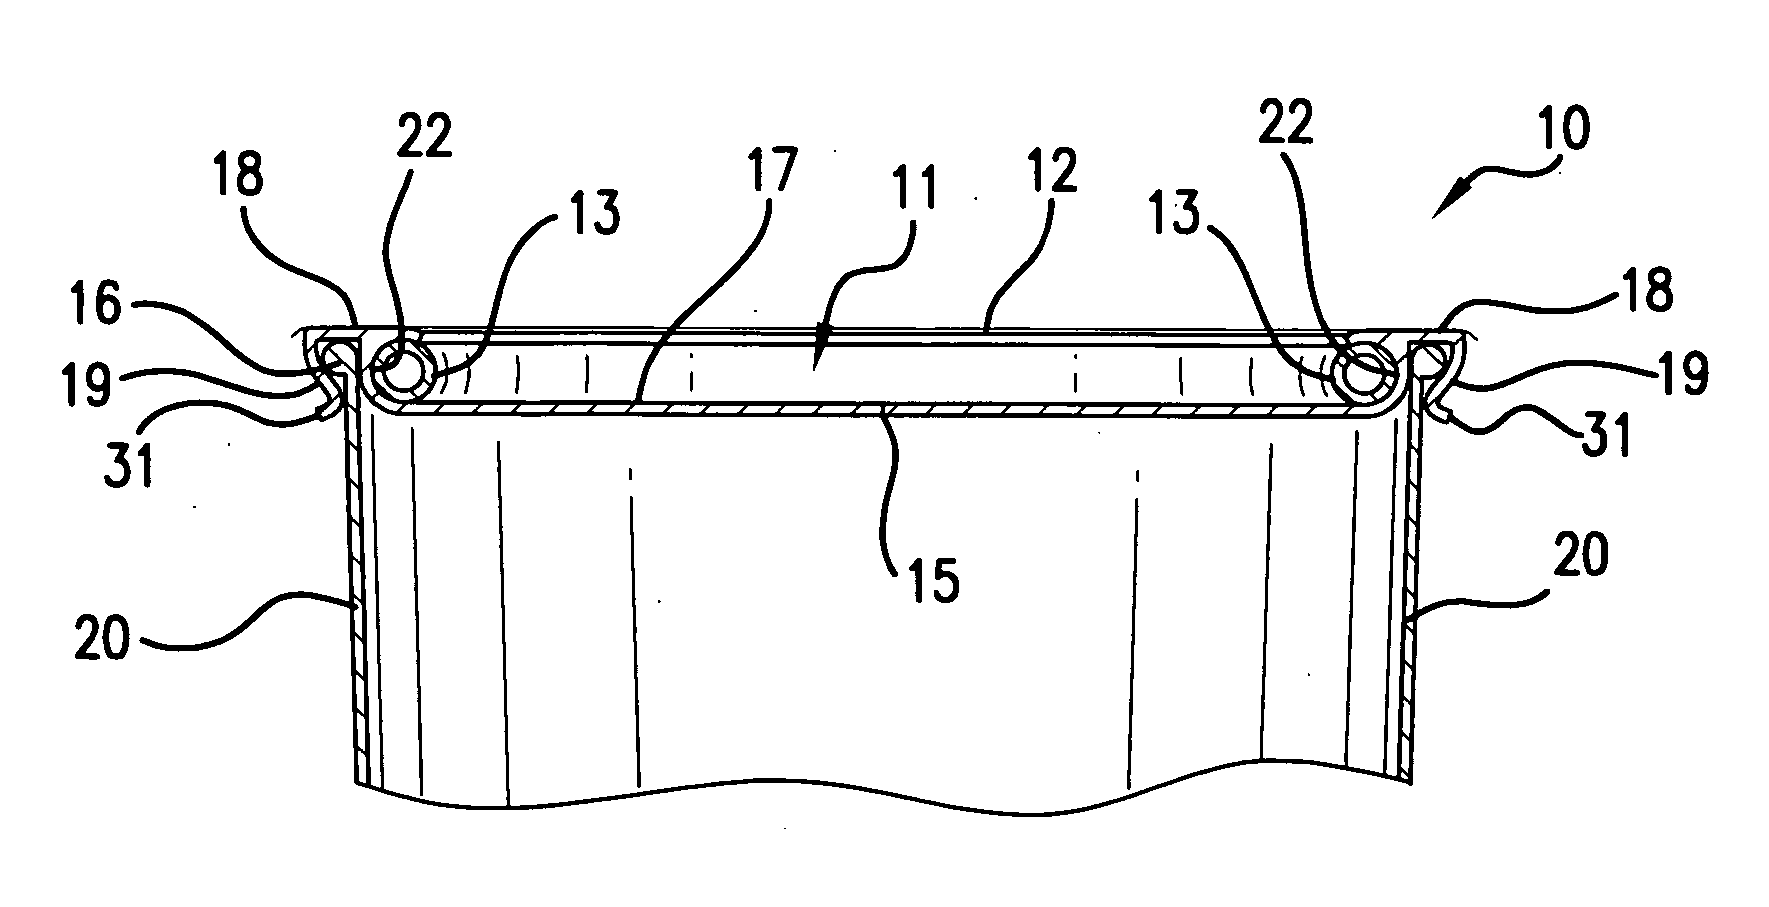 Beverage container or container lid with drinking straw